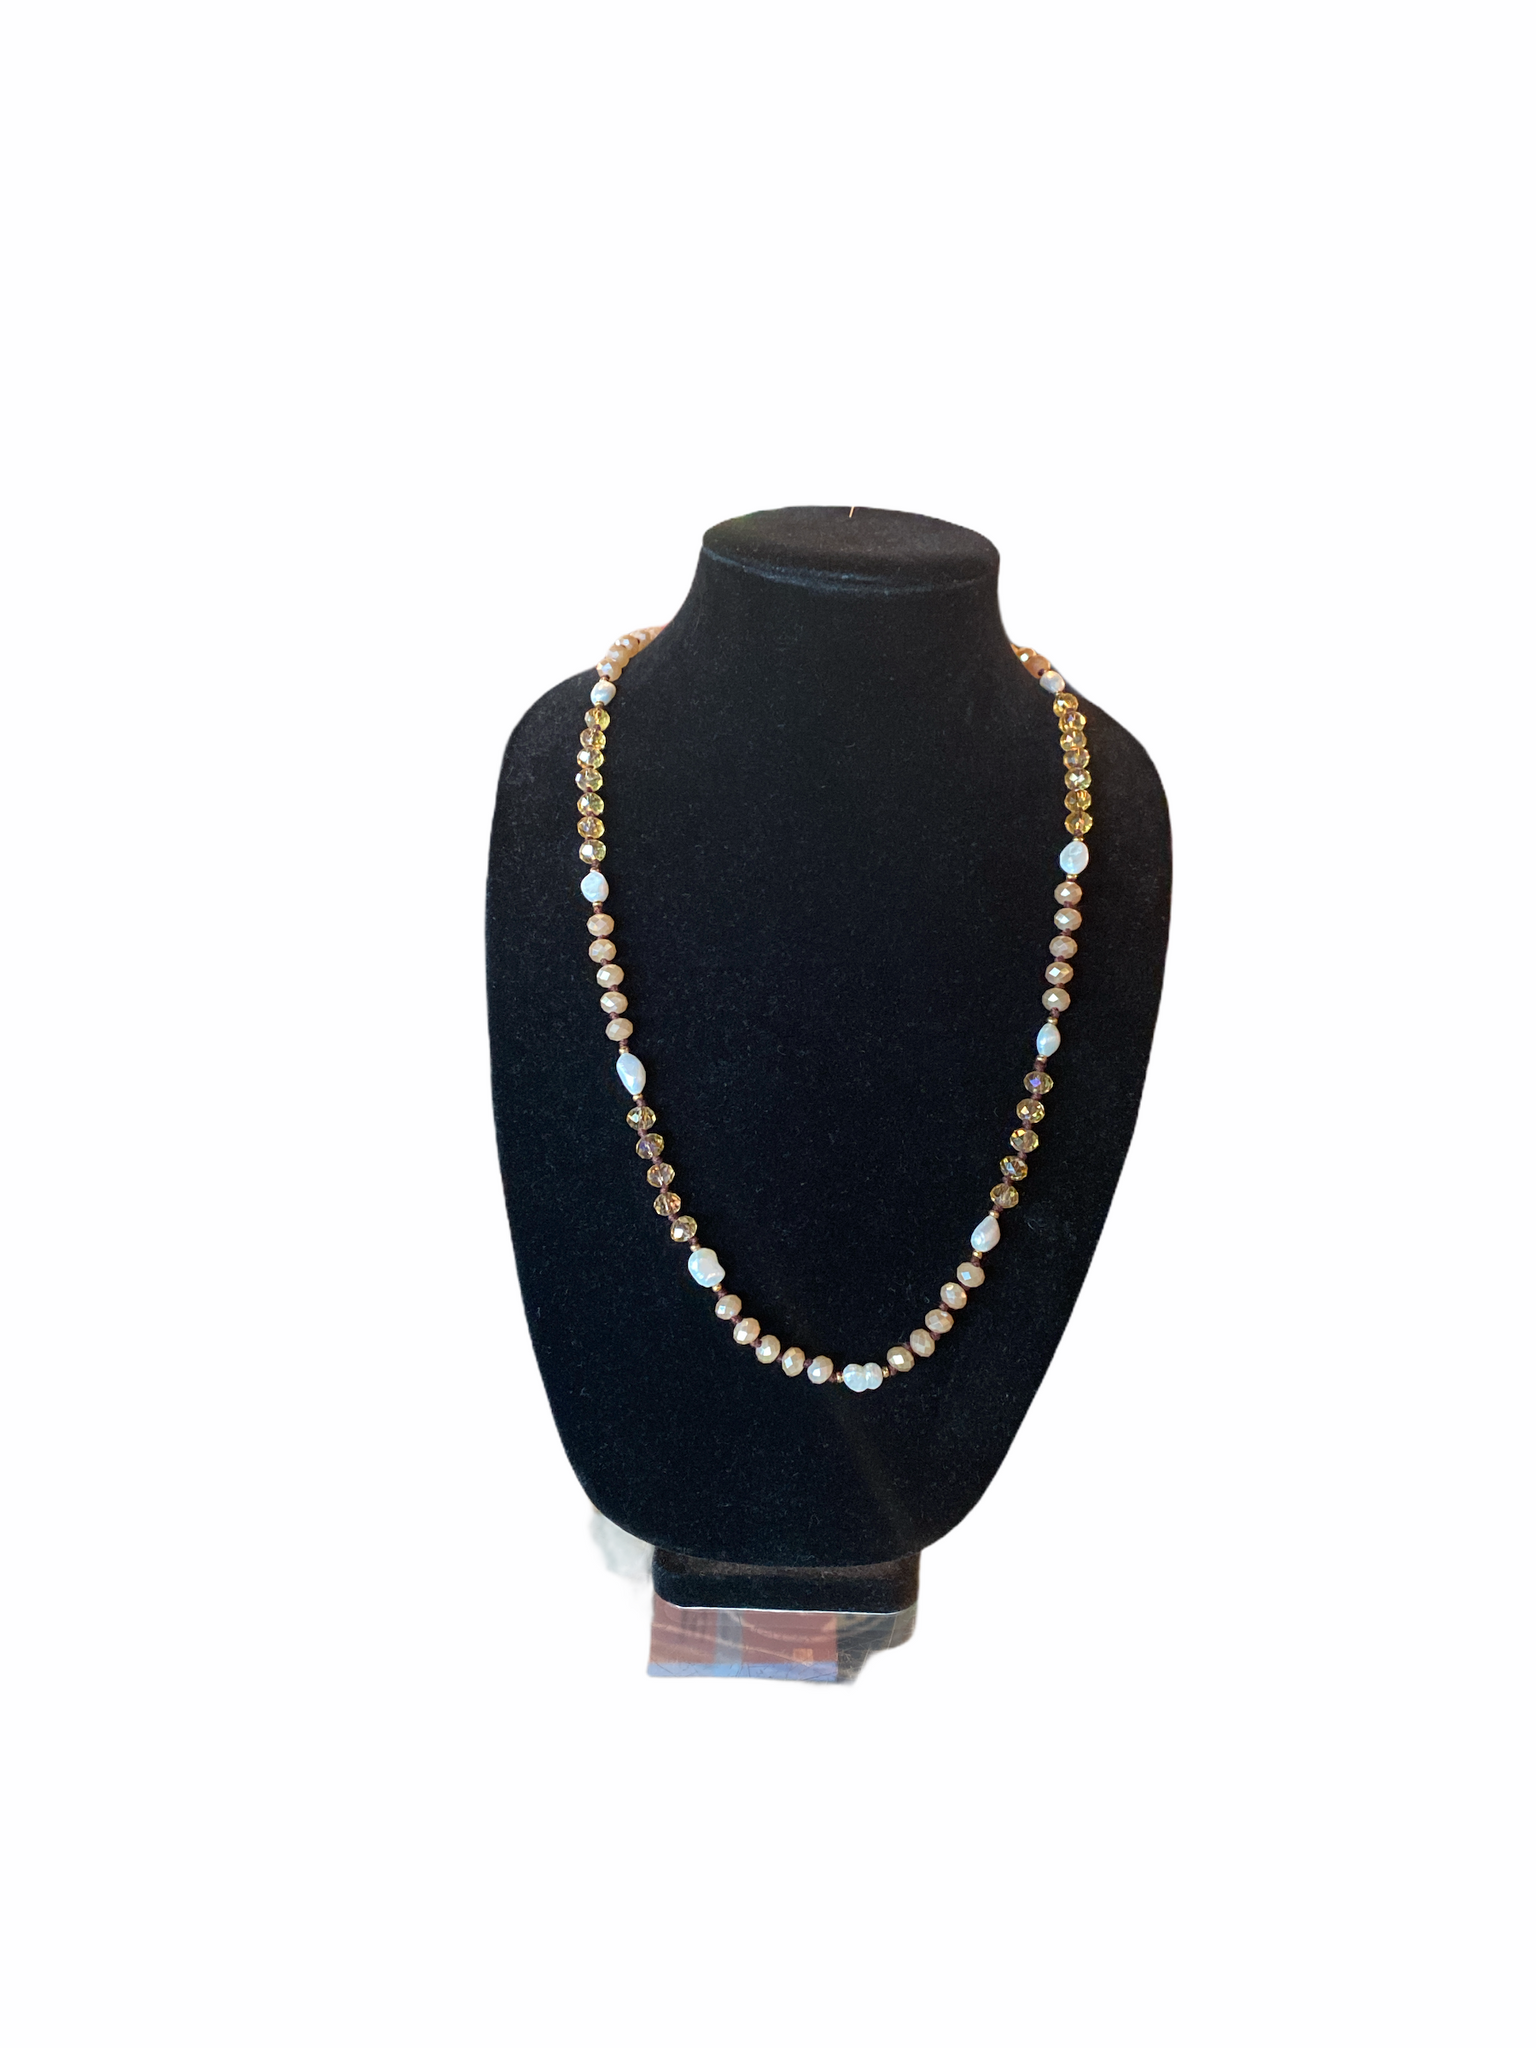 Crystal and Pearl Bead Necklace